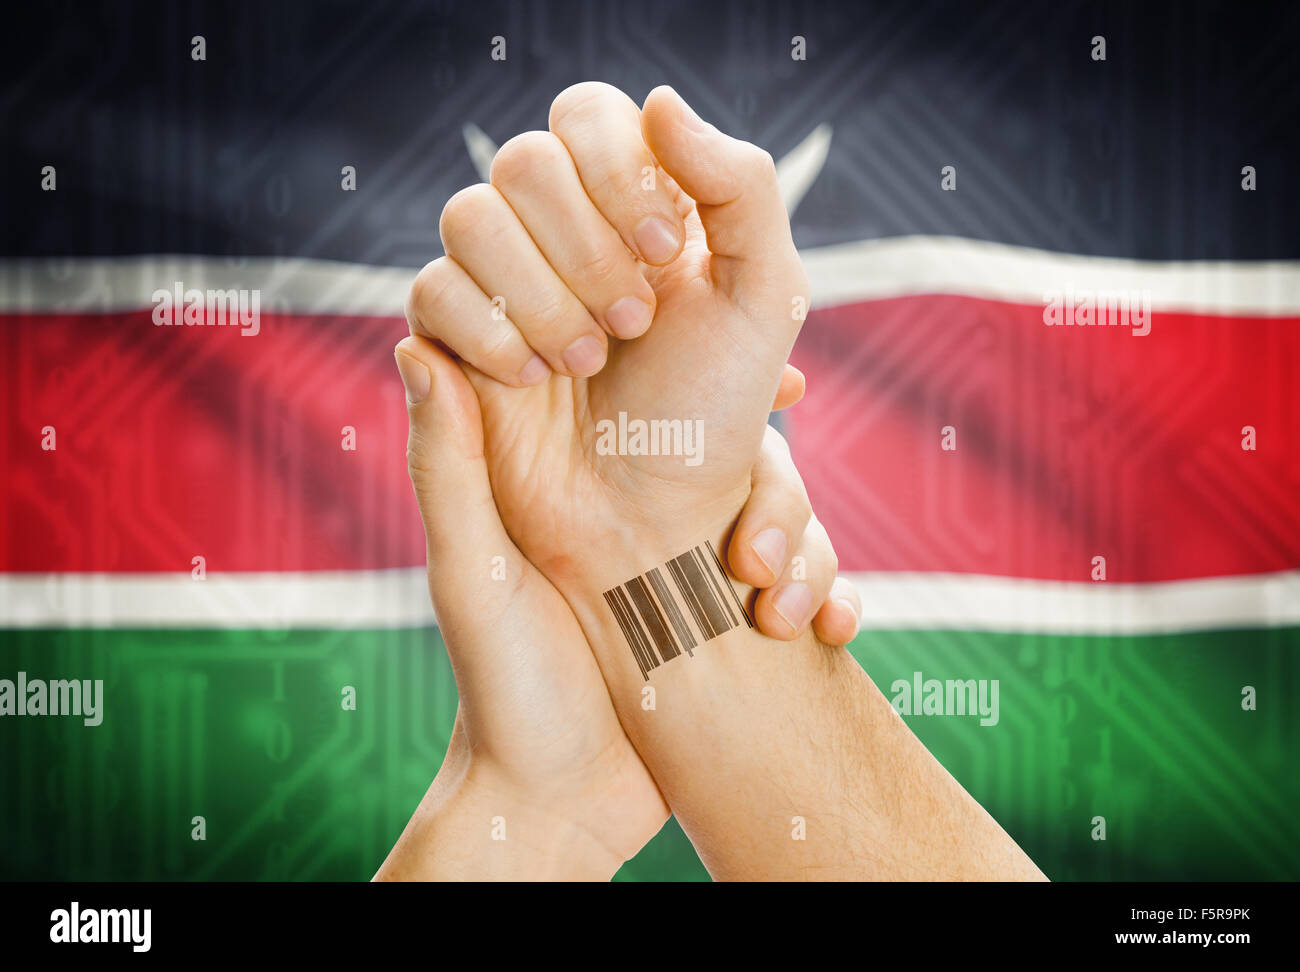 Barcode ID number on wrist of a human and national flag on background - Kenya Stock Photo